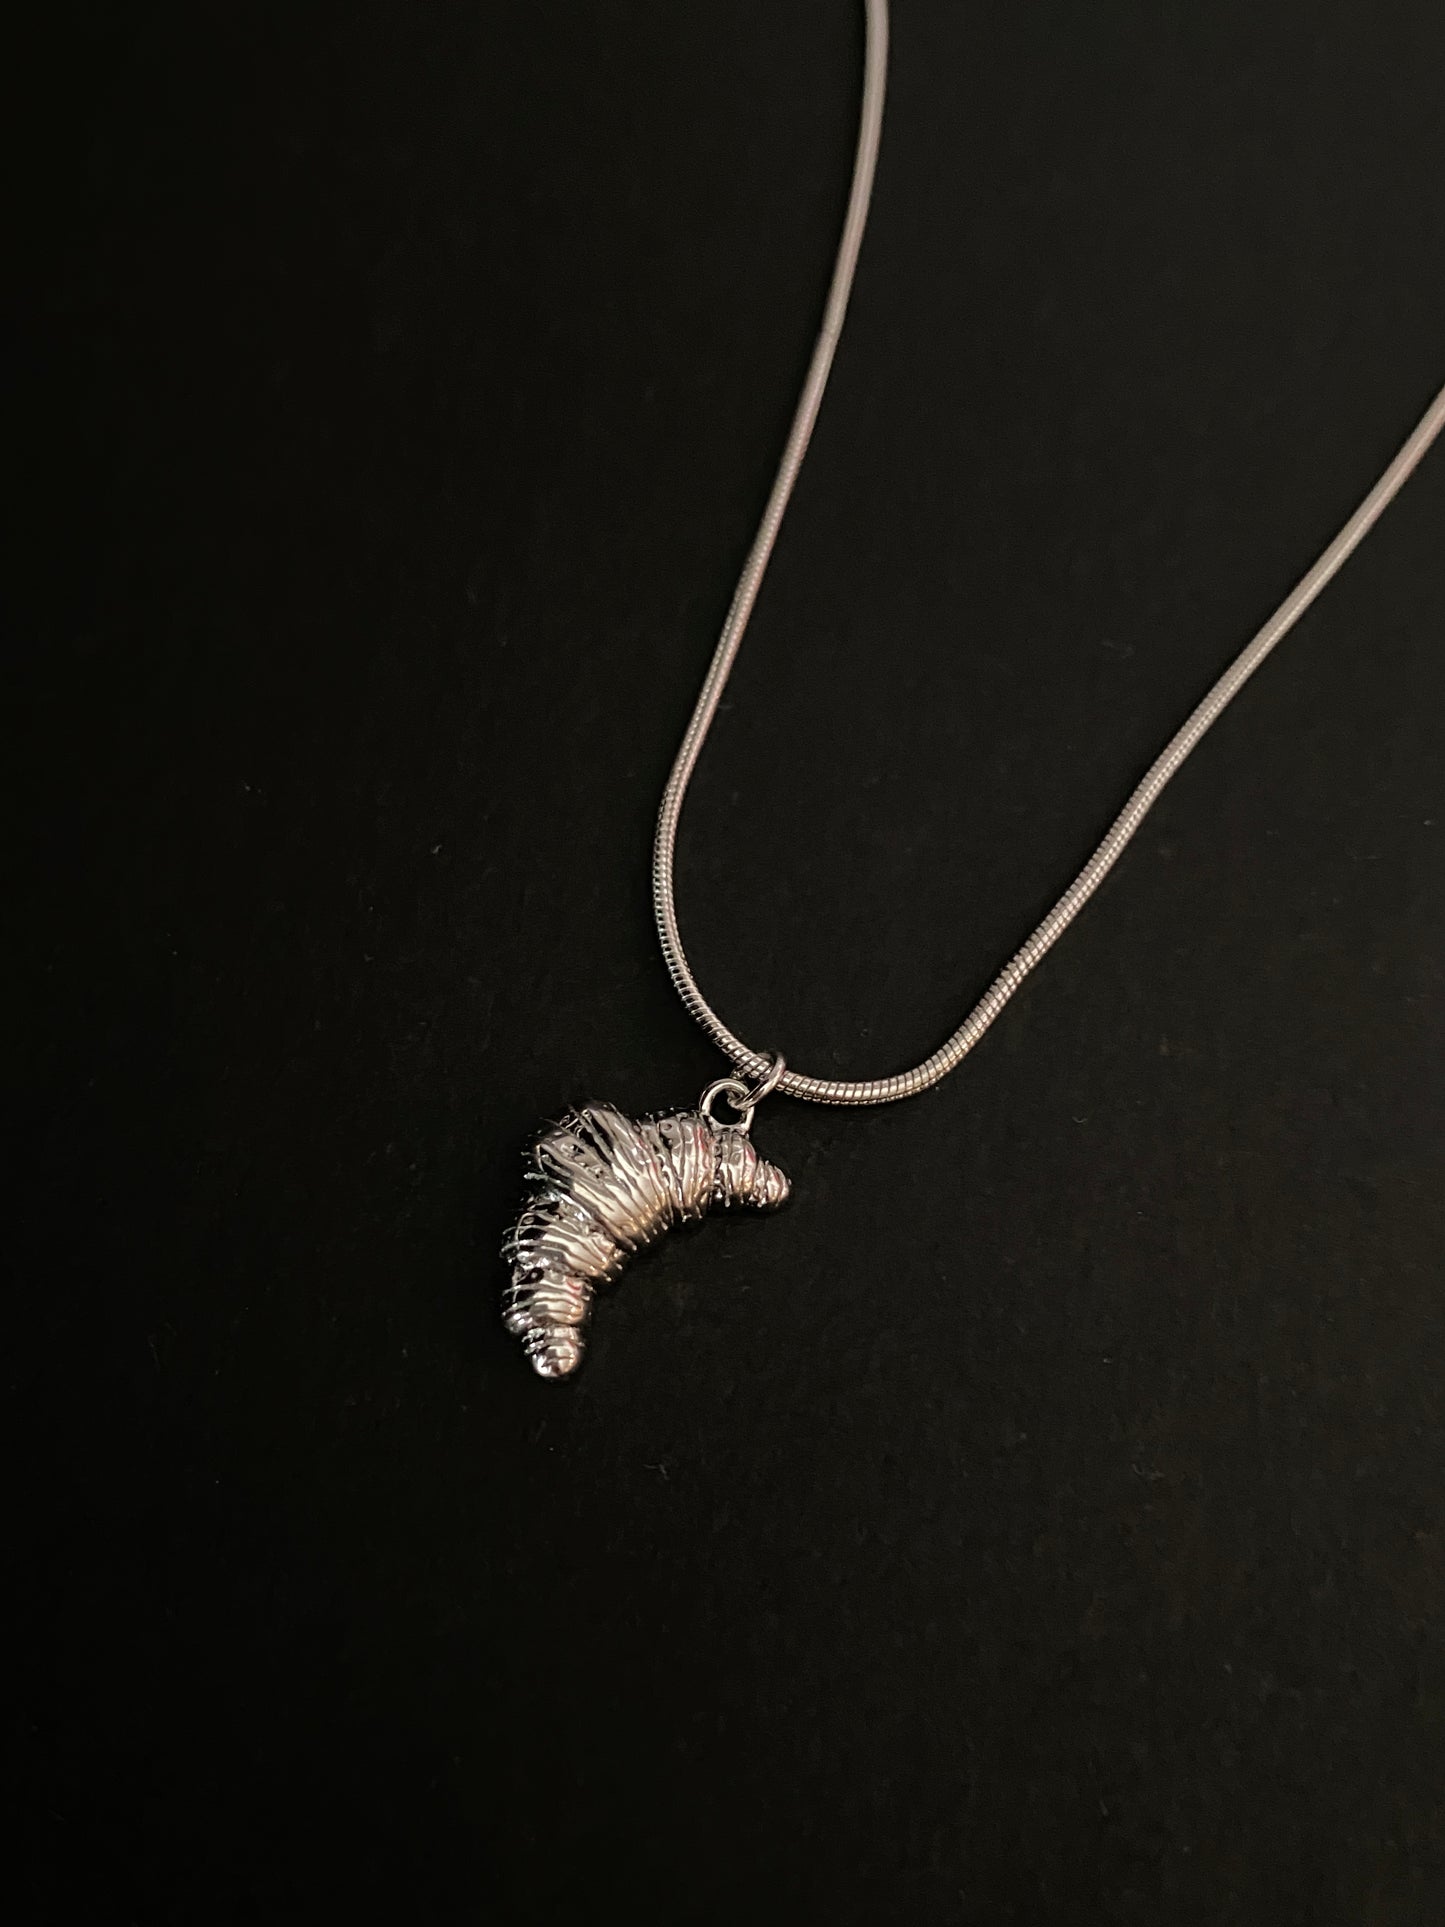 Silver Croissant Necklace - Quirky Bakery Collection by AlfirDesign